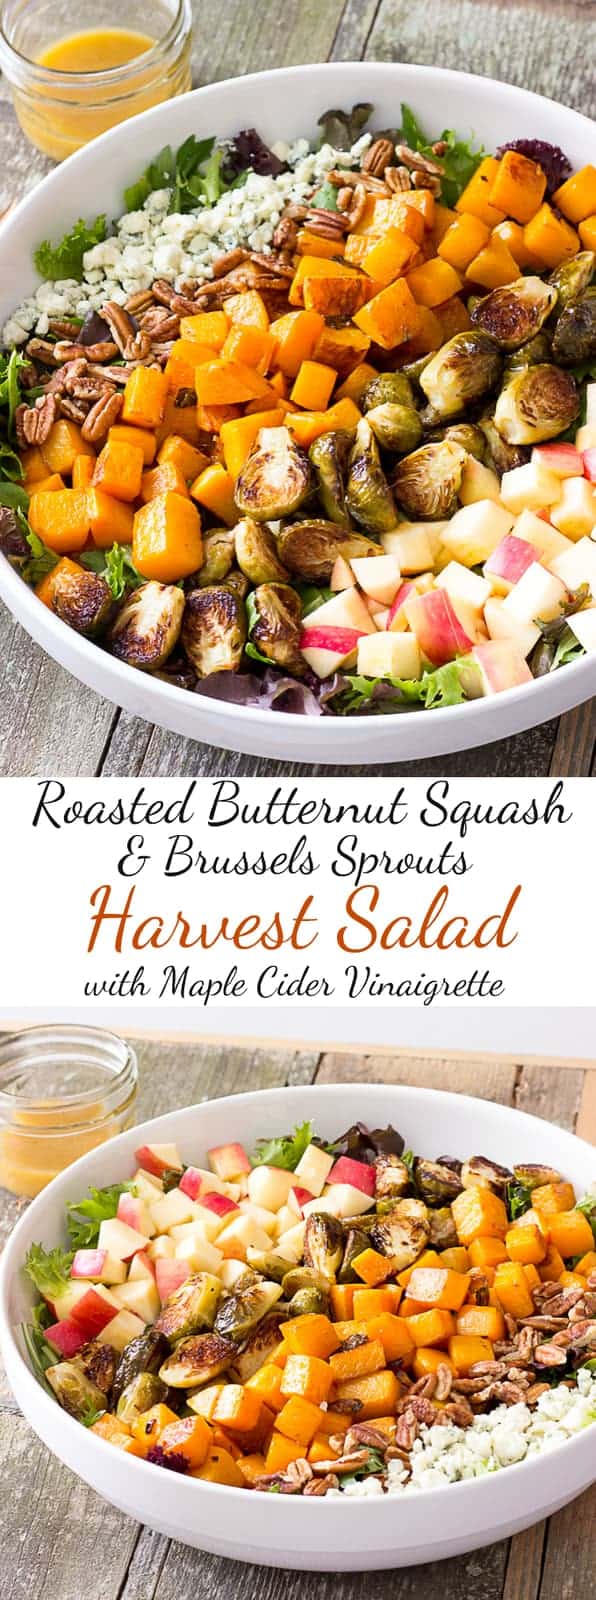 Roasted Butternut Squash & Brussels Sprouts Harvest Salad with Maple Cider Vinaigrette